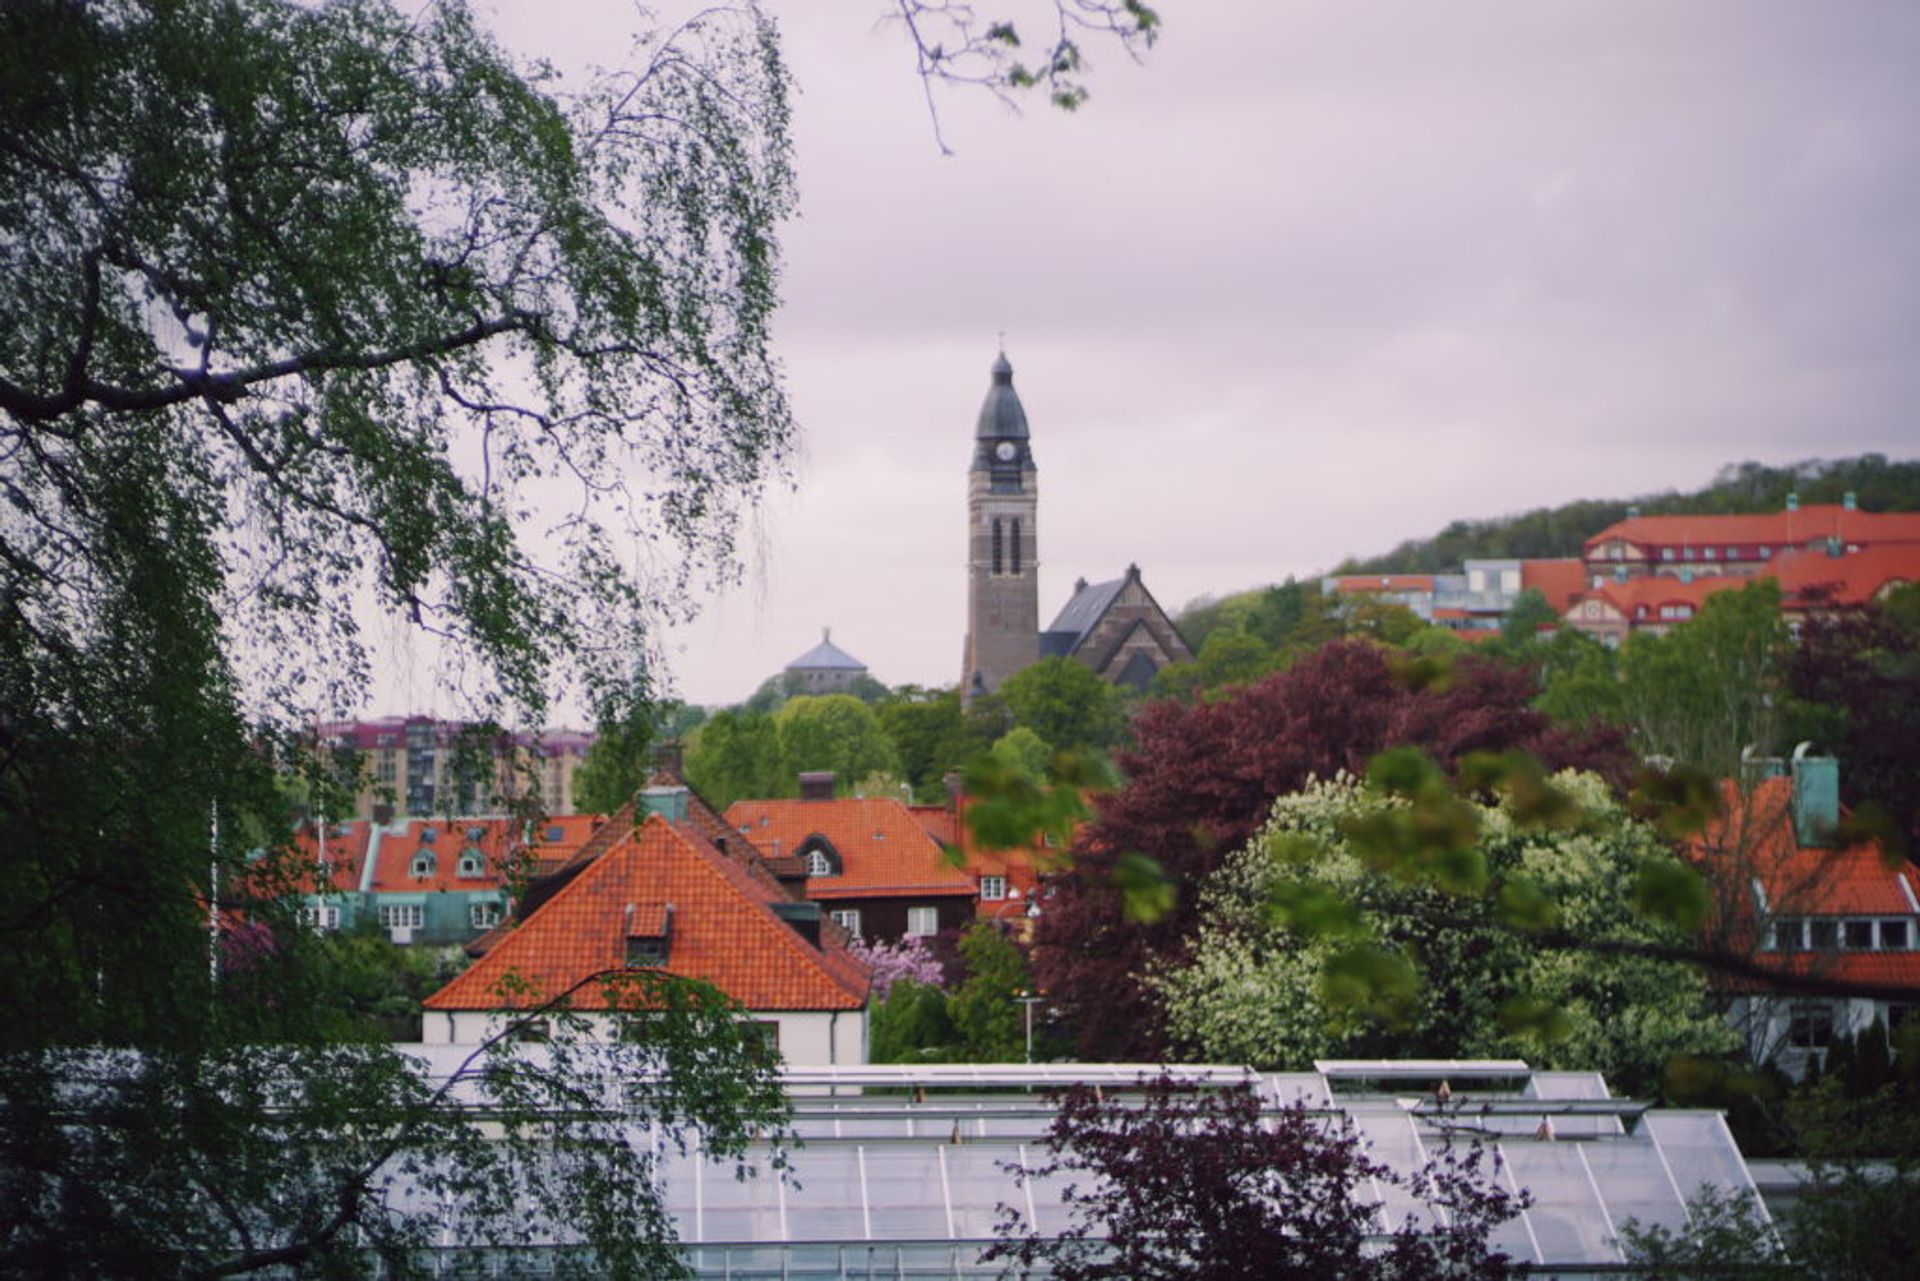 A view of a church spire and other buildings from a park.